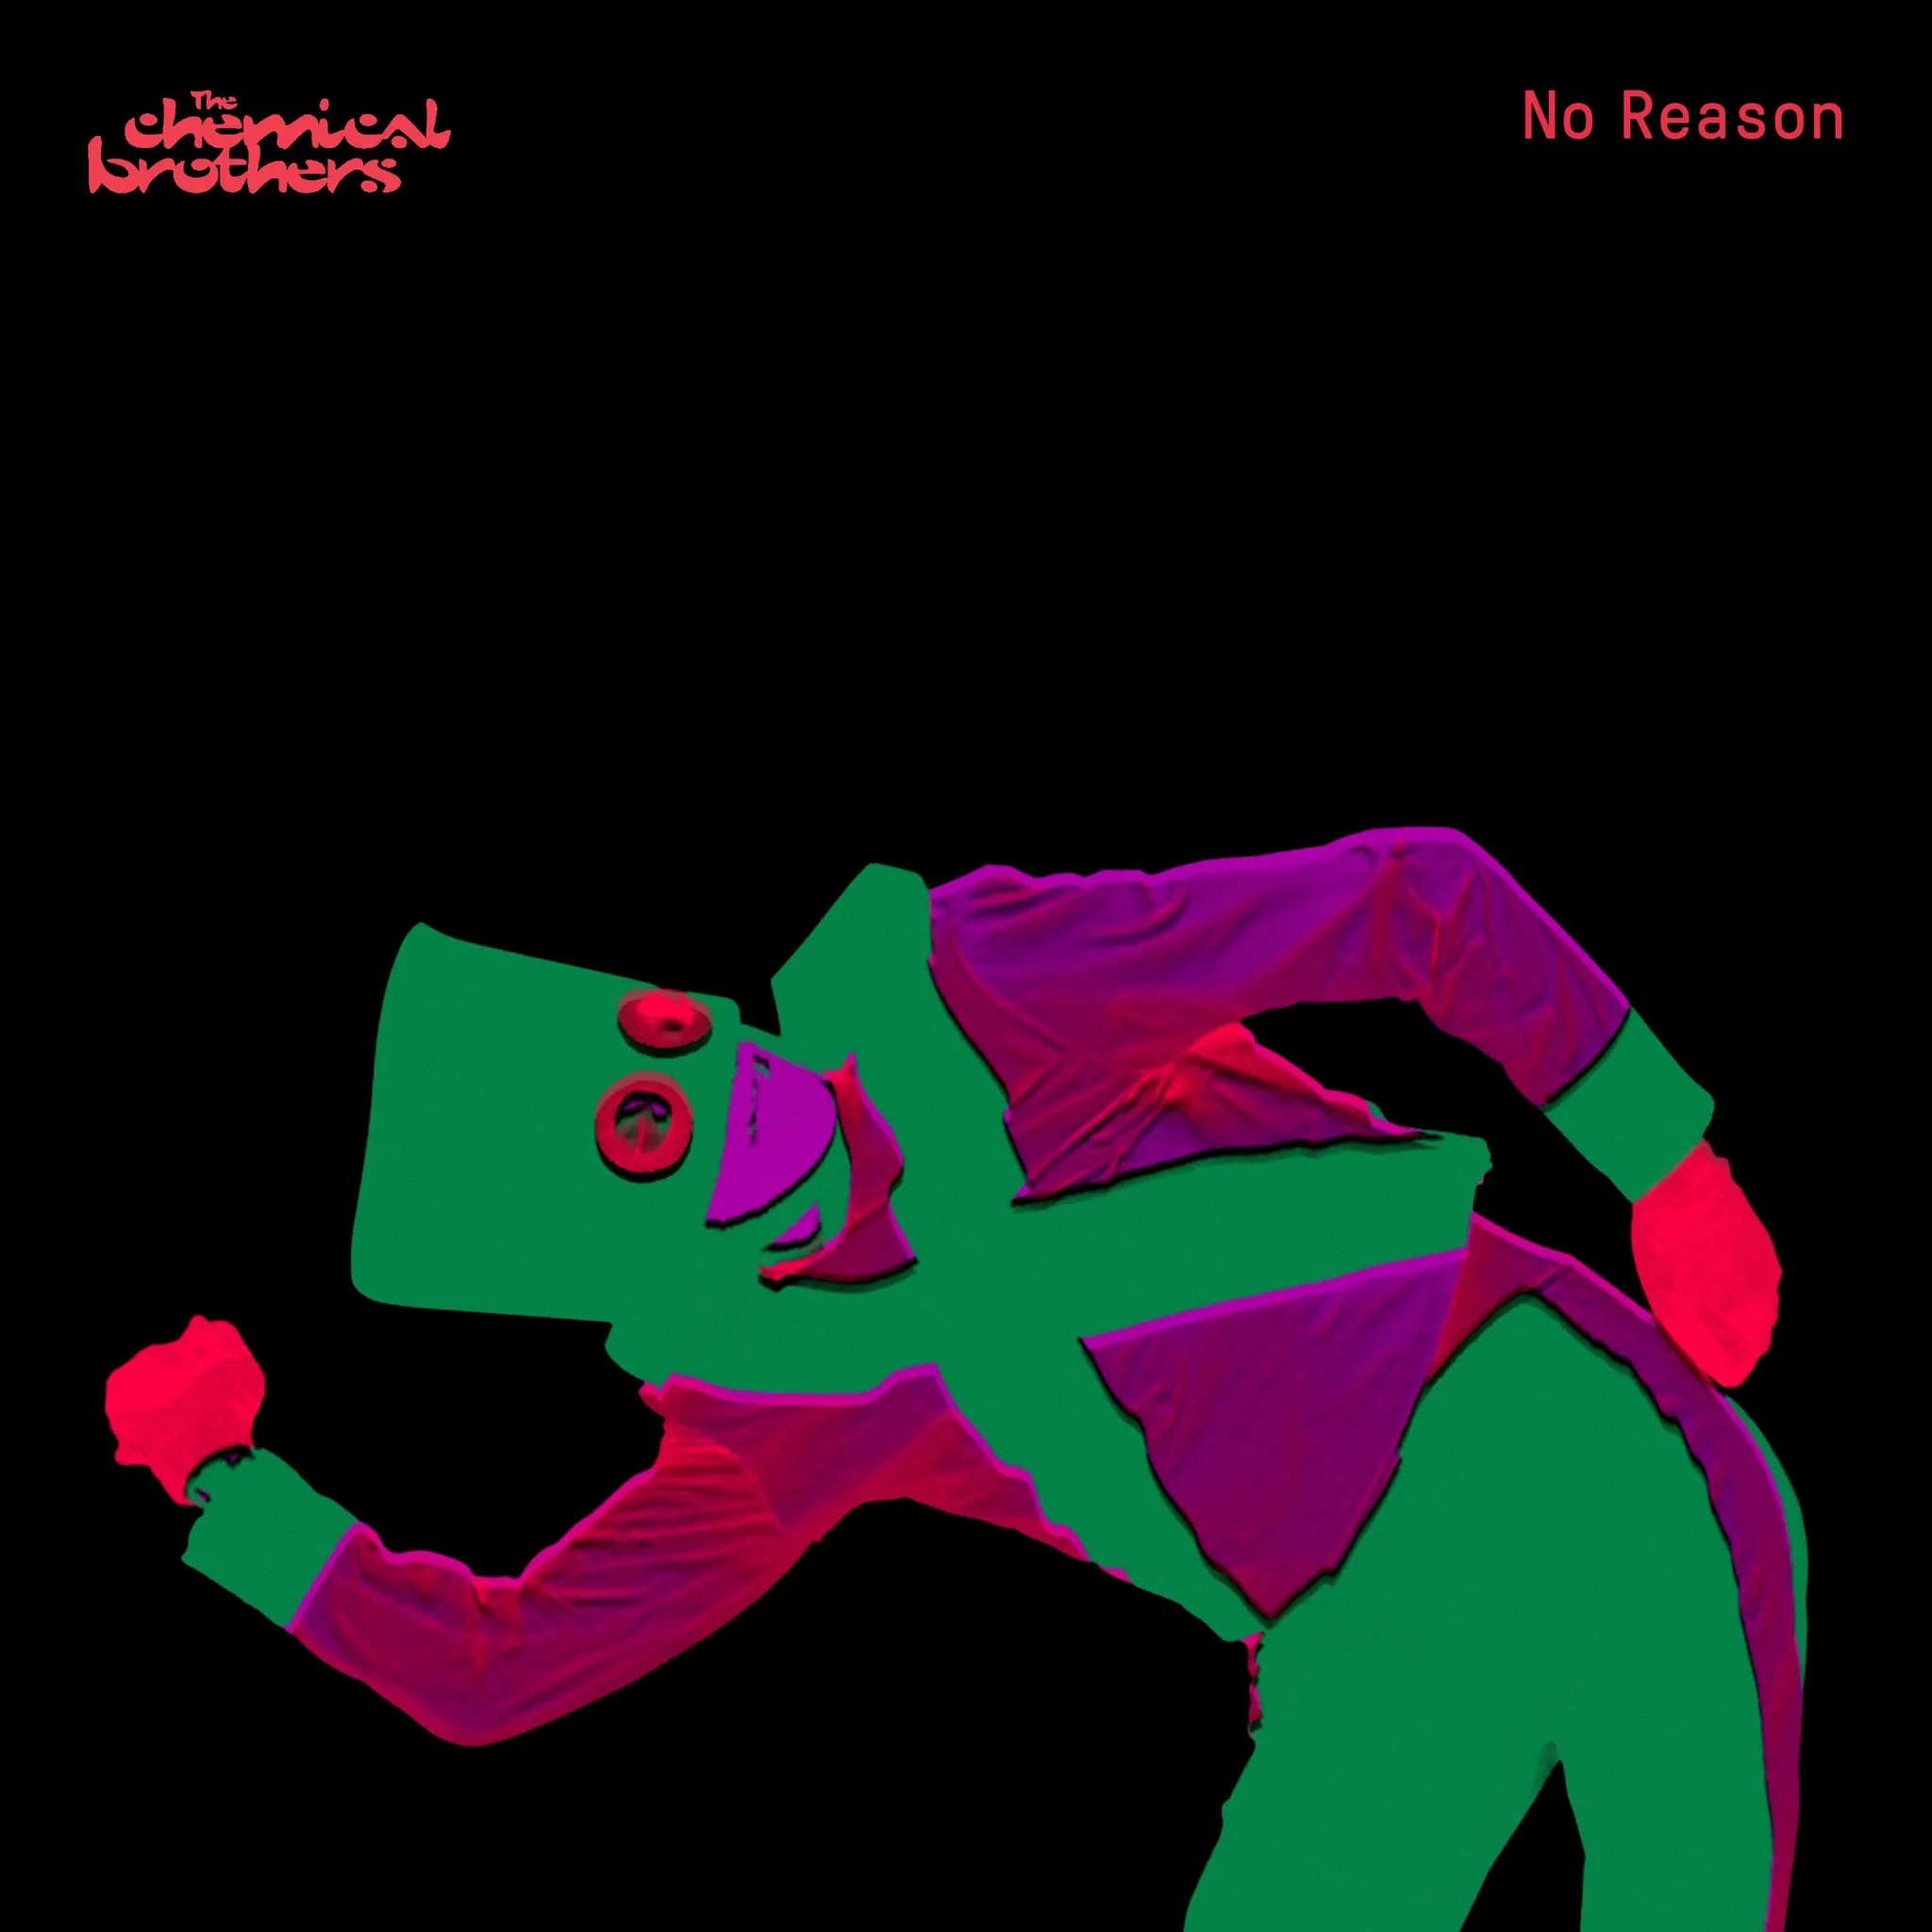 <strong>The Chemical Brothers - No Reason</strong> (Vinyl 12 - red)